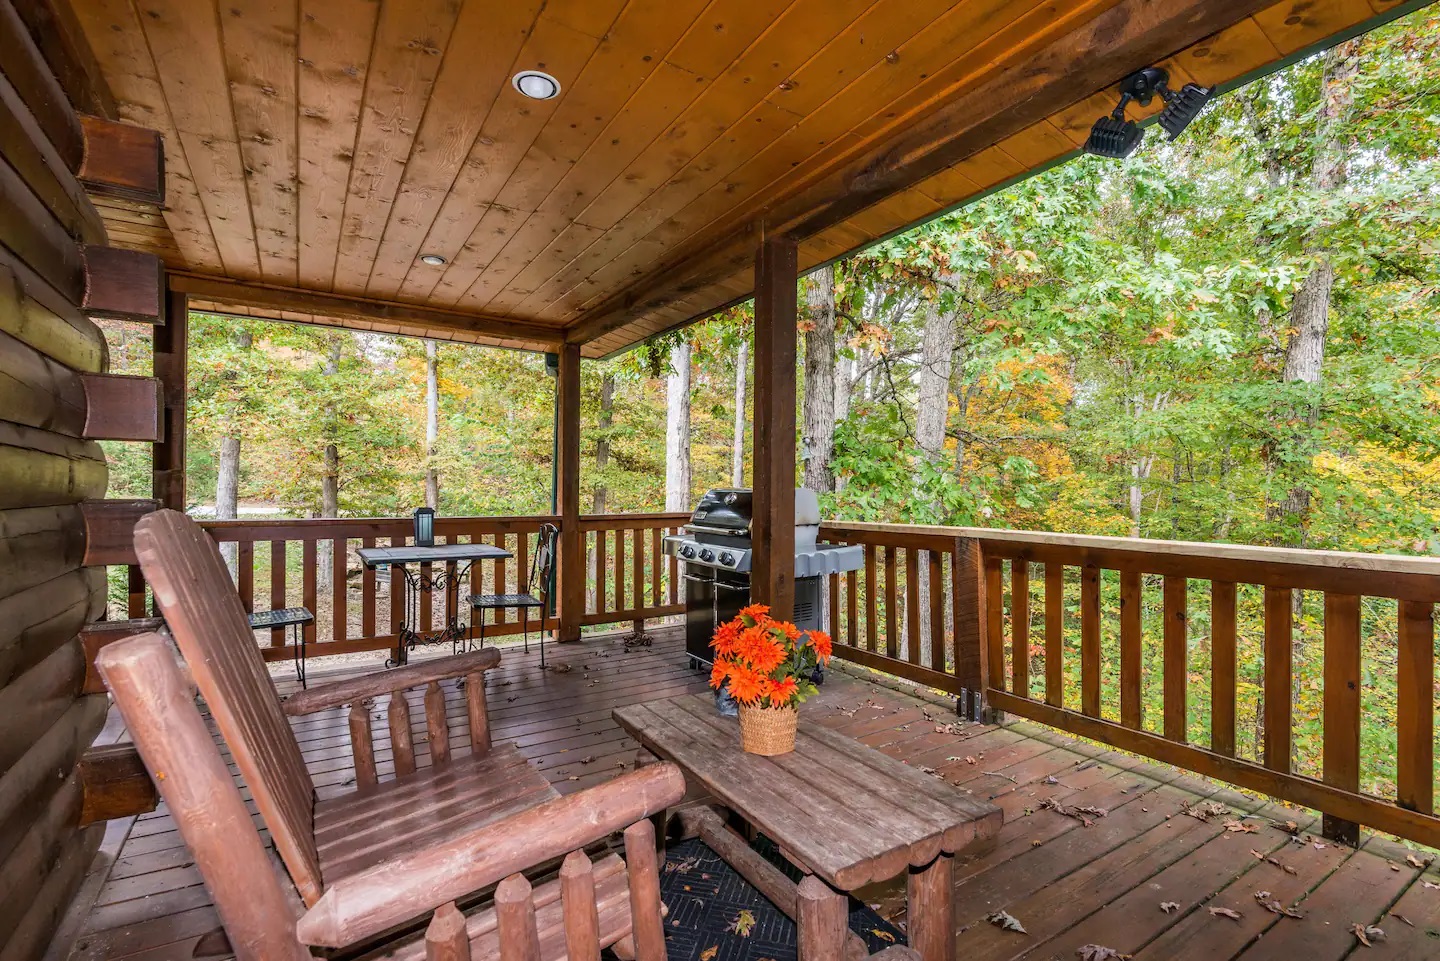 Fairytale Log Cabin barbecue on a porch with chair made of wood